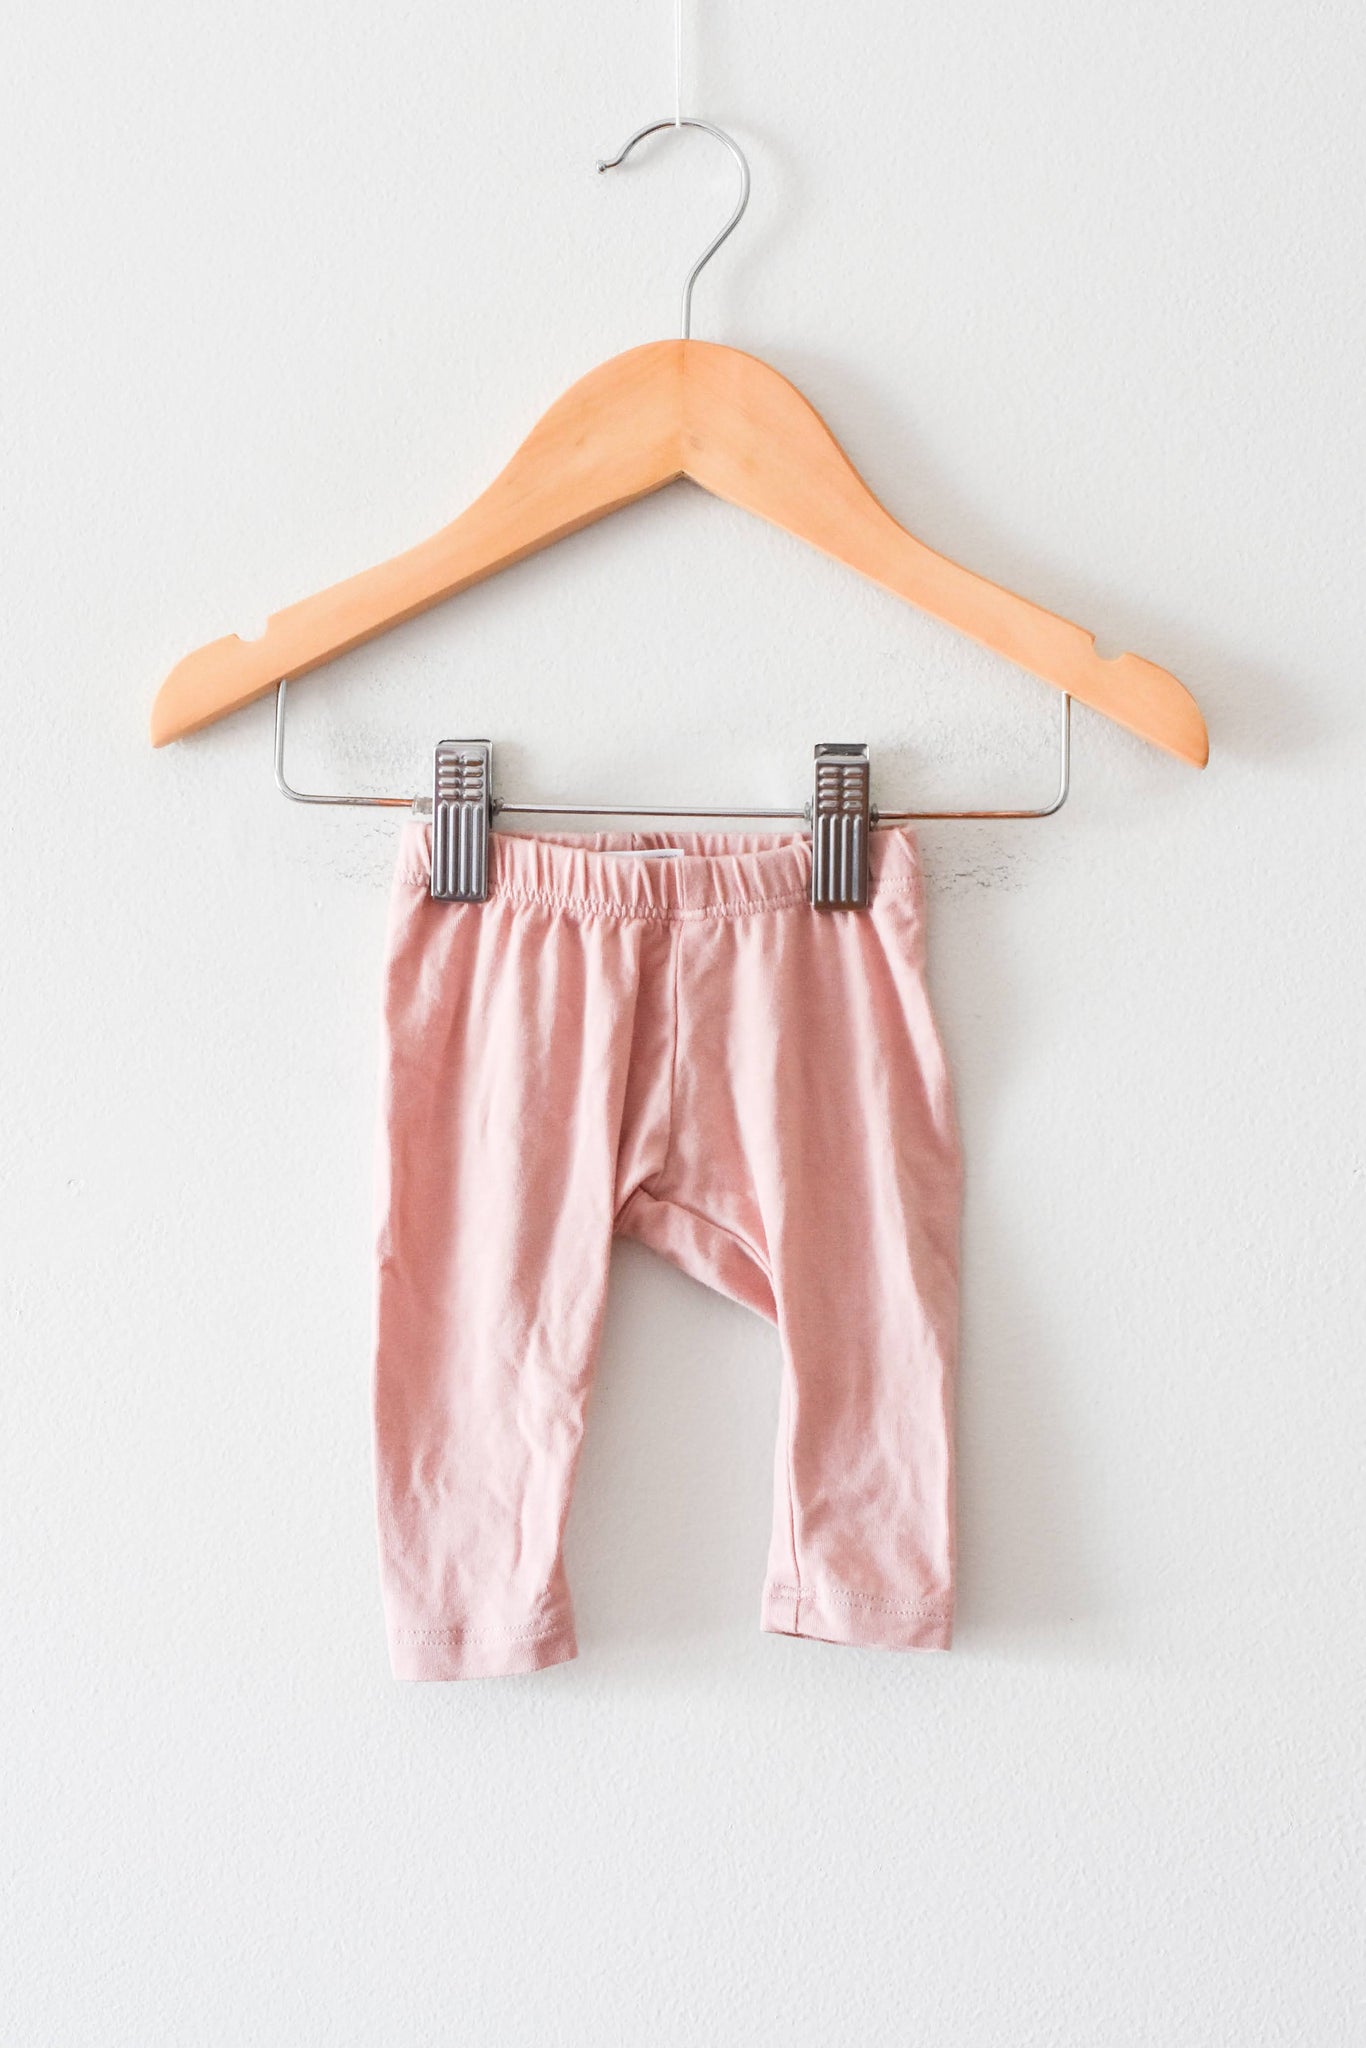 Jax and Lennon Pink Leggings • 0-3 months